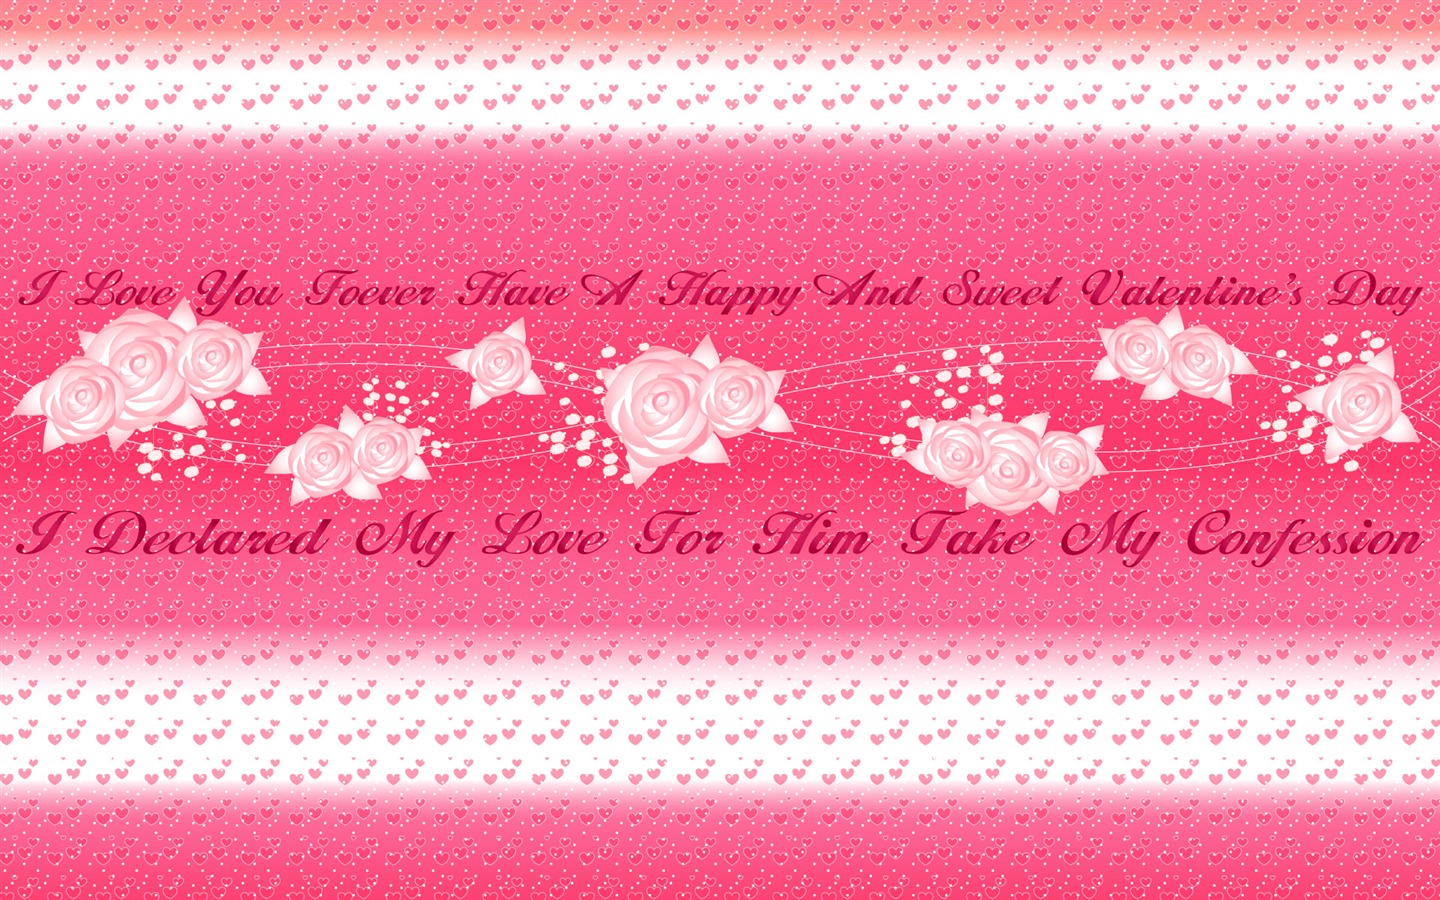 Valentine's Day Theme Wallpapers (2) #7 - 1440x900